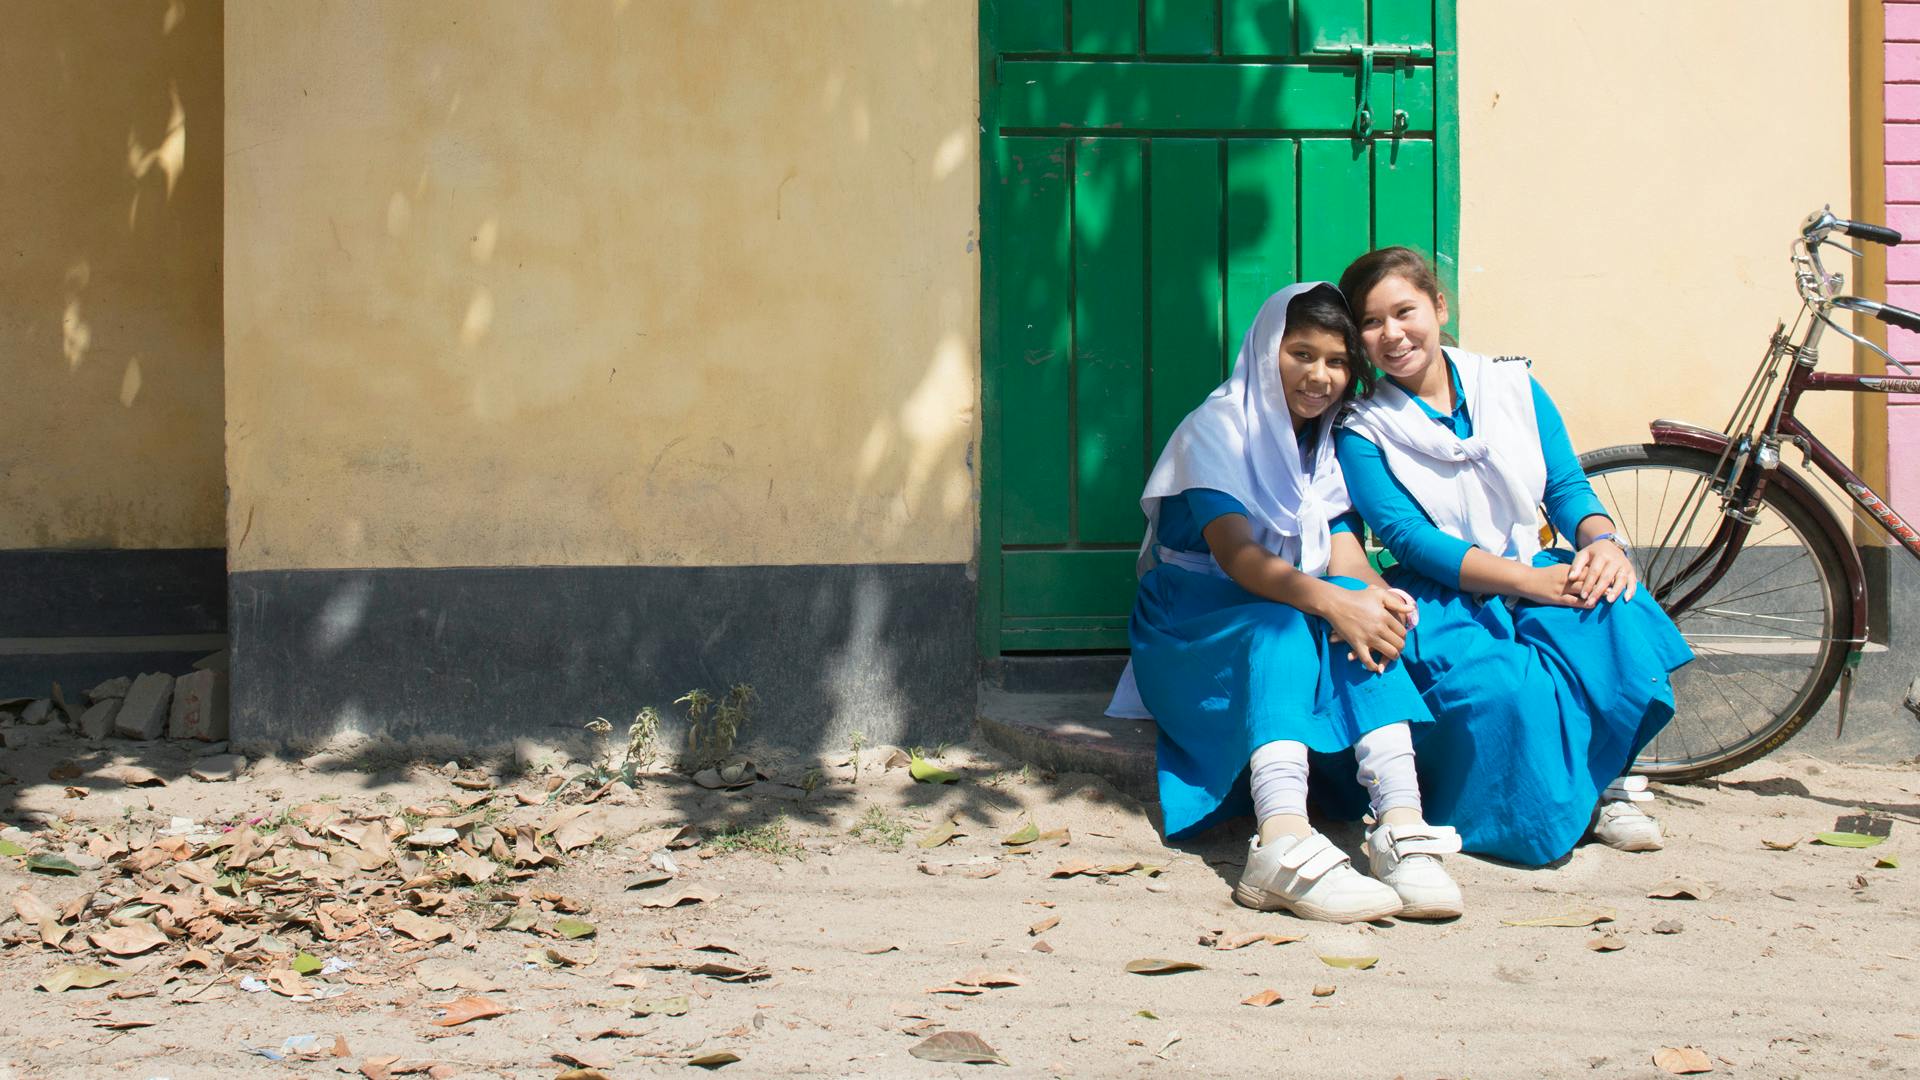 Two girls sitting by a green door, with their heada against each other.